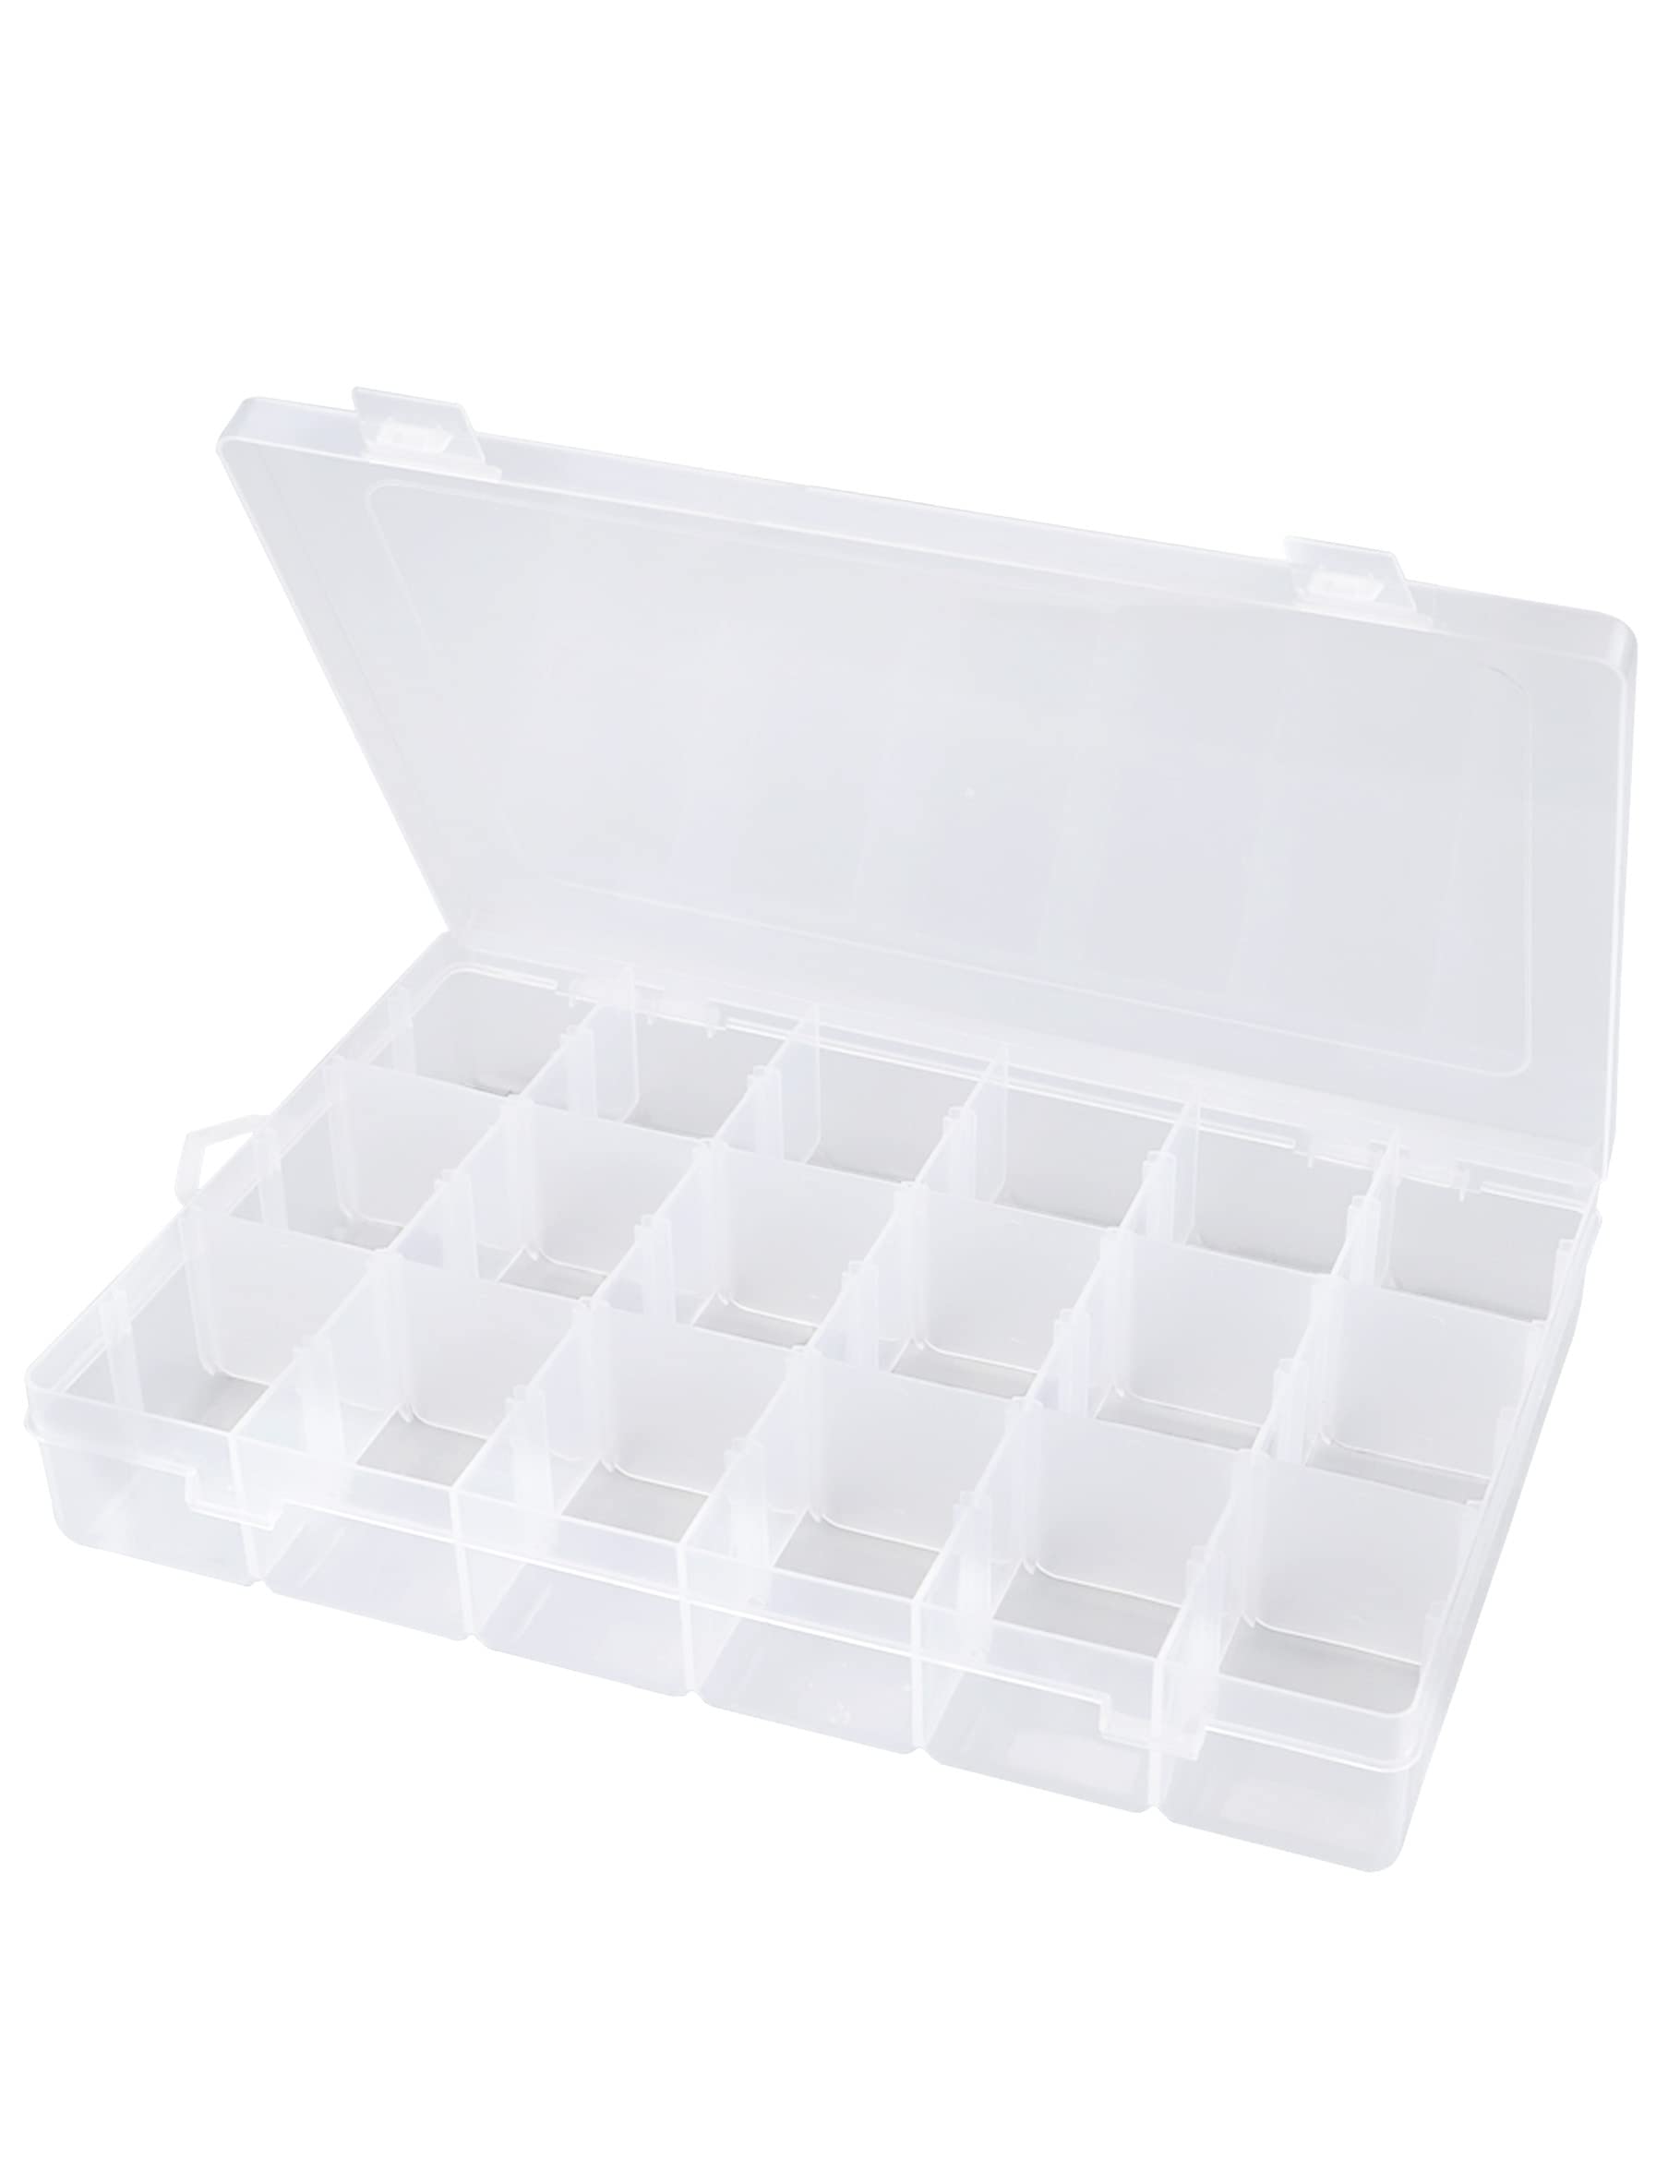 BOX026 Clear Beads Tackle Box Fishing Lure Jewelry Nail Art Small Parts  Display Plastic transparent Case Storage Organizer Containers kisten boxen